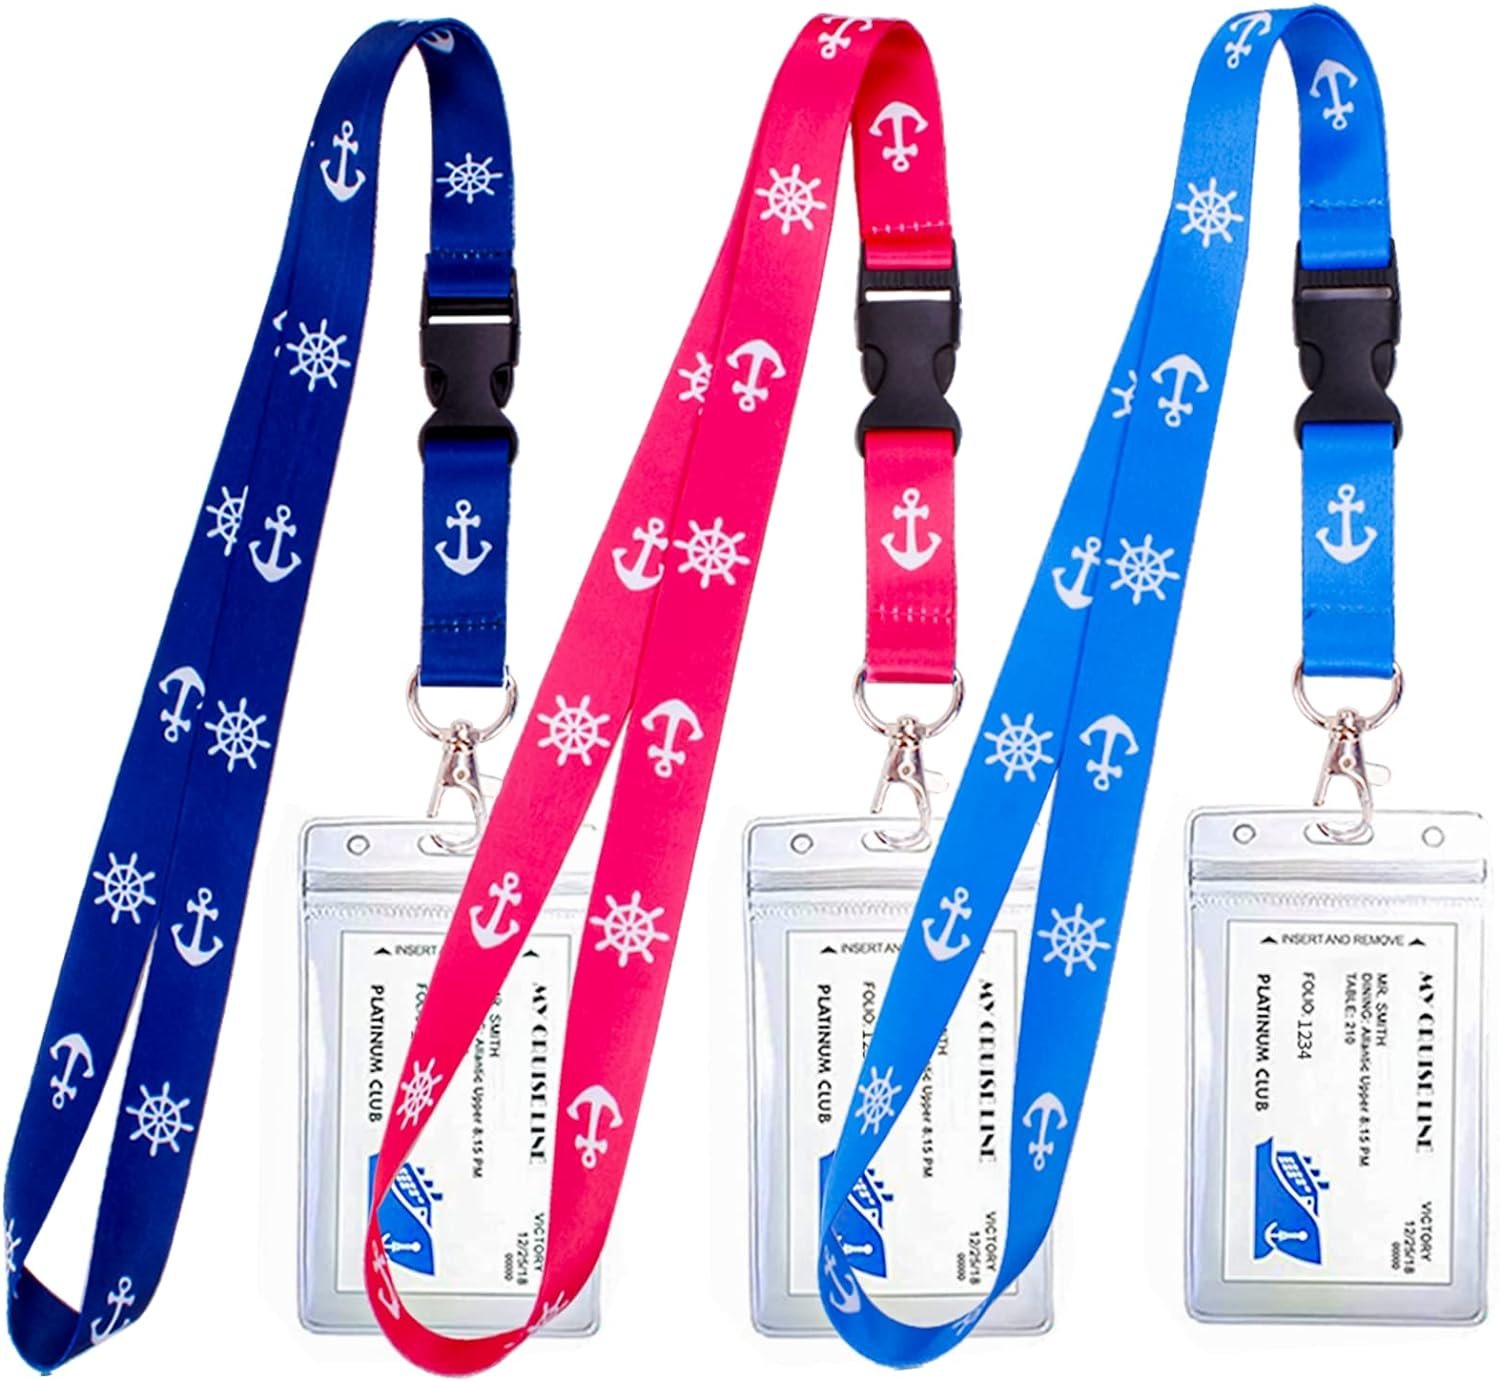 Comparing Cruise Lanyards: Waterproof, Detachable Buckle, and More